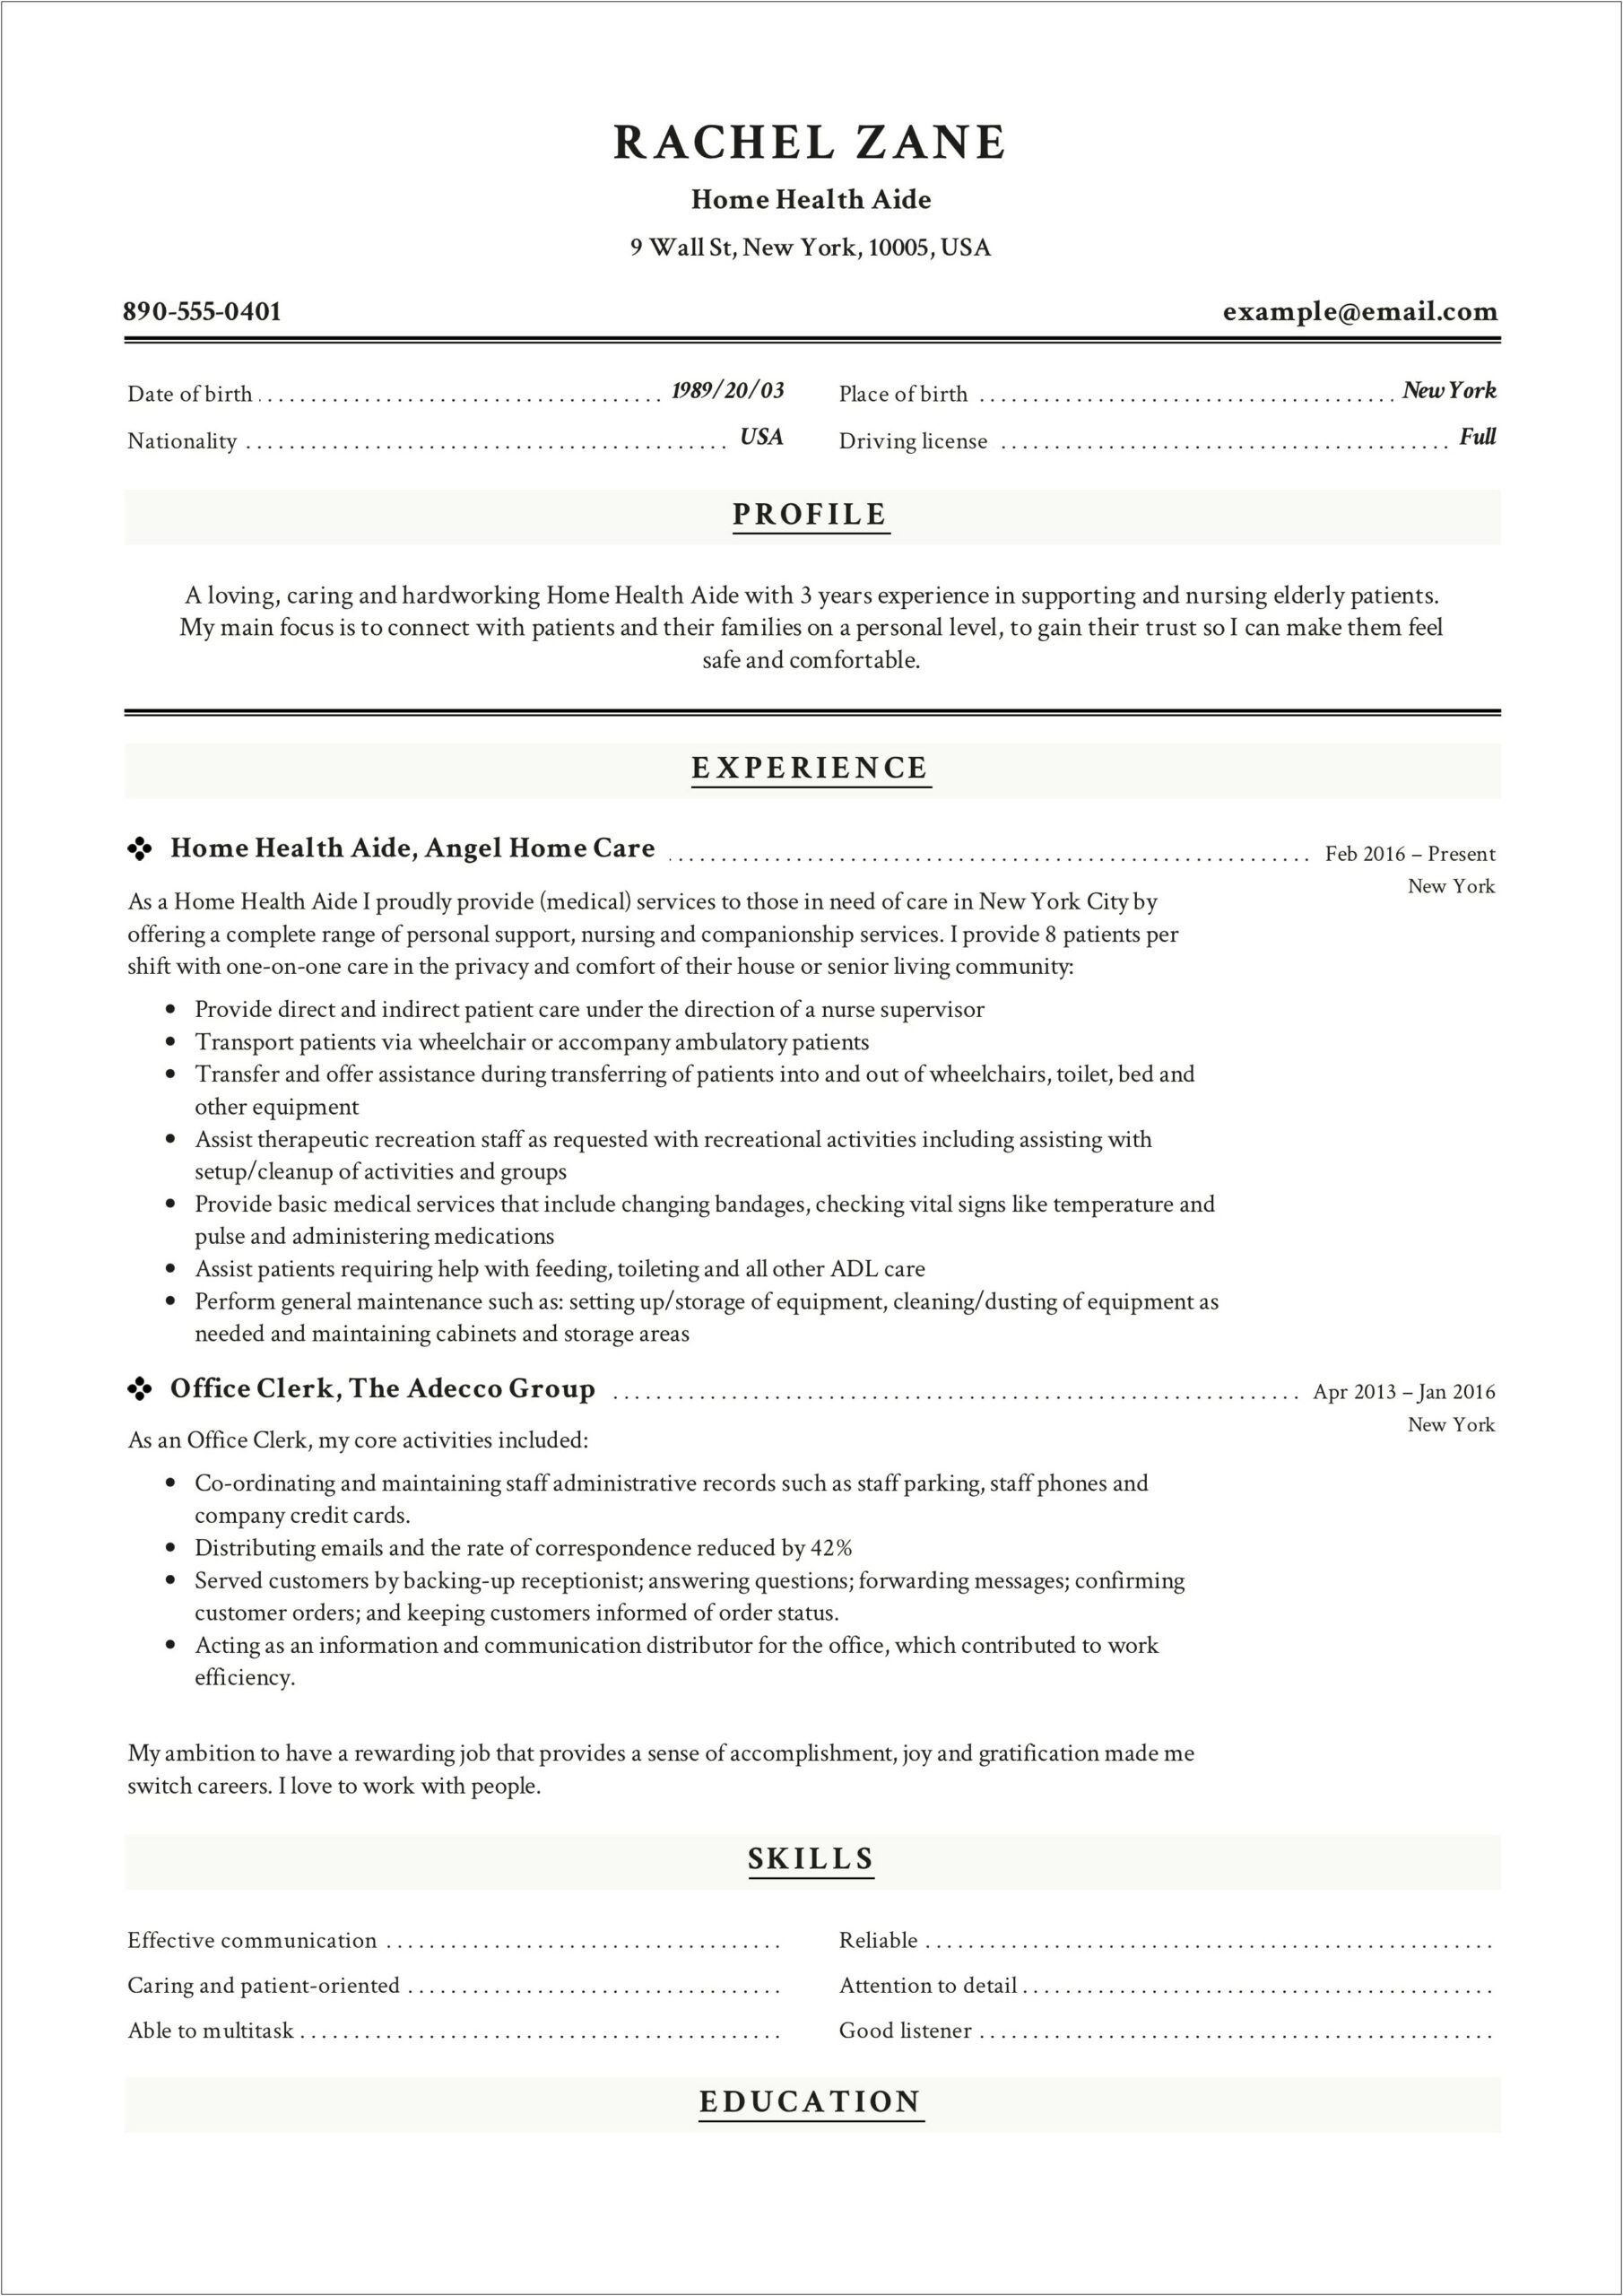 Home Health Aid Resume Examples